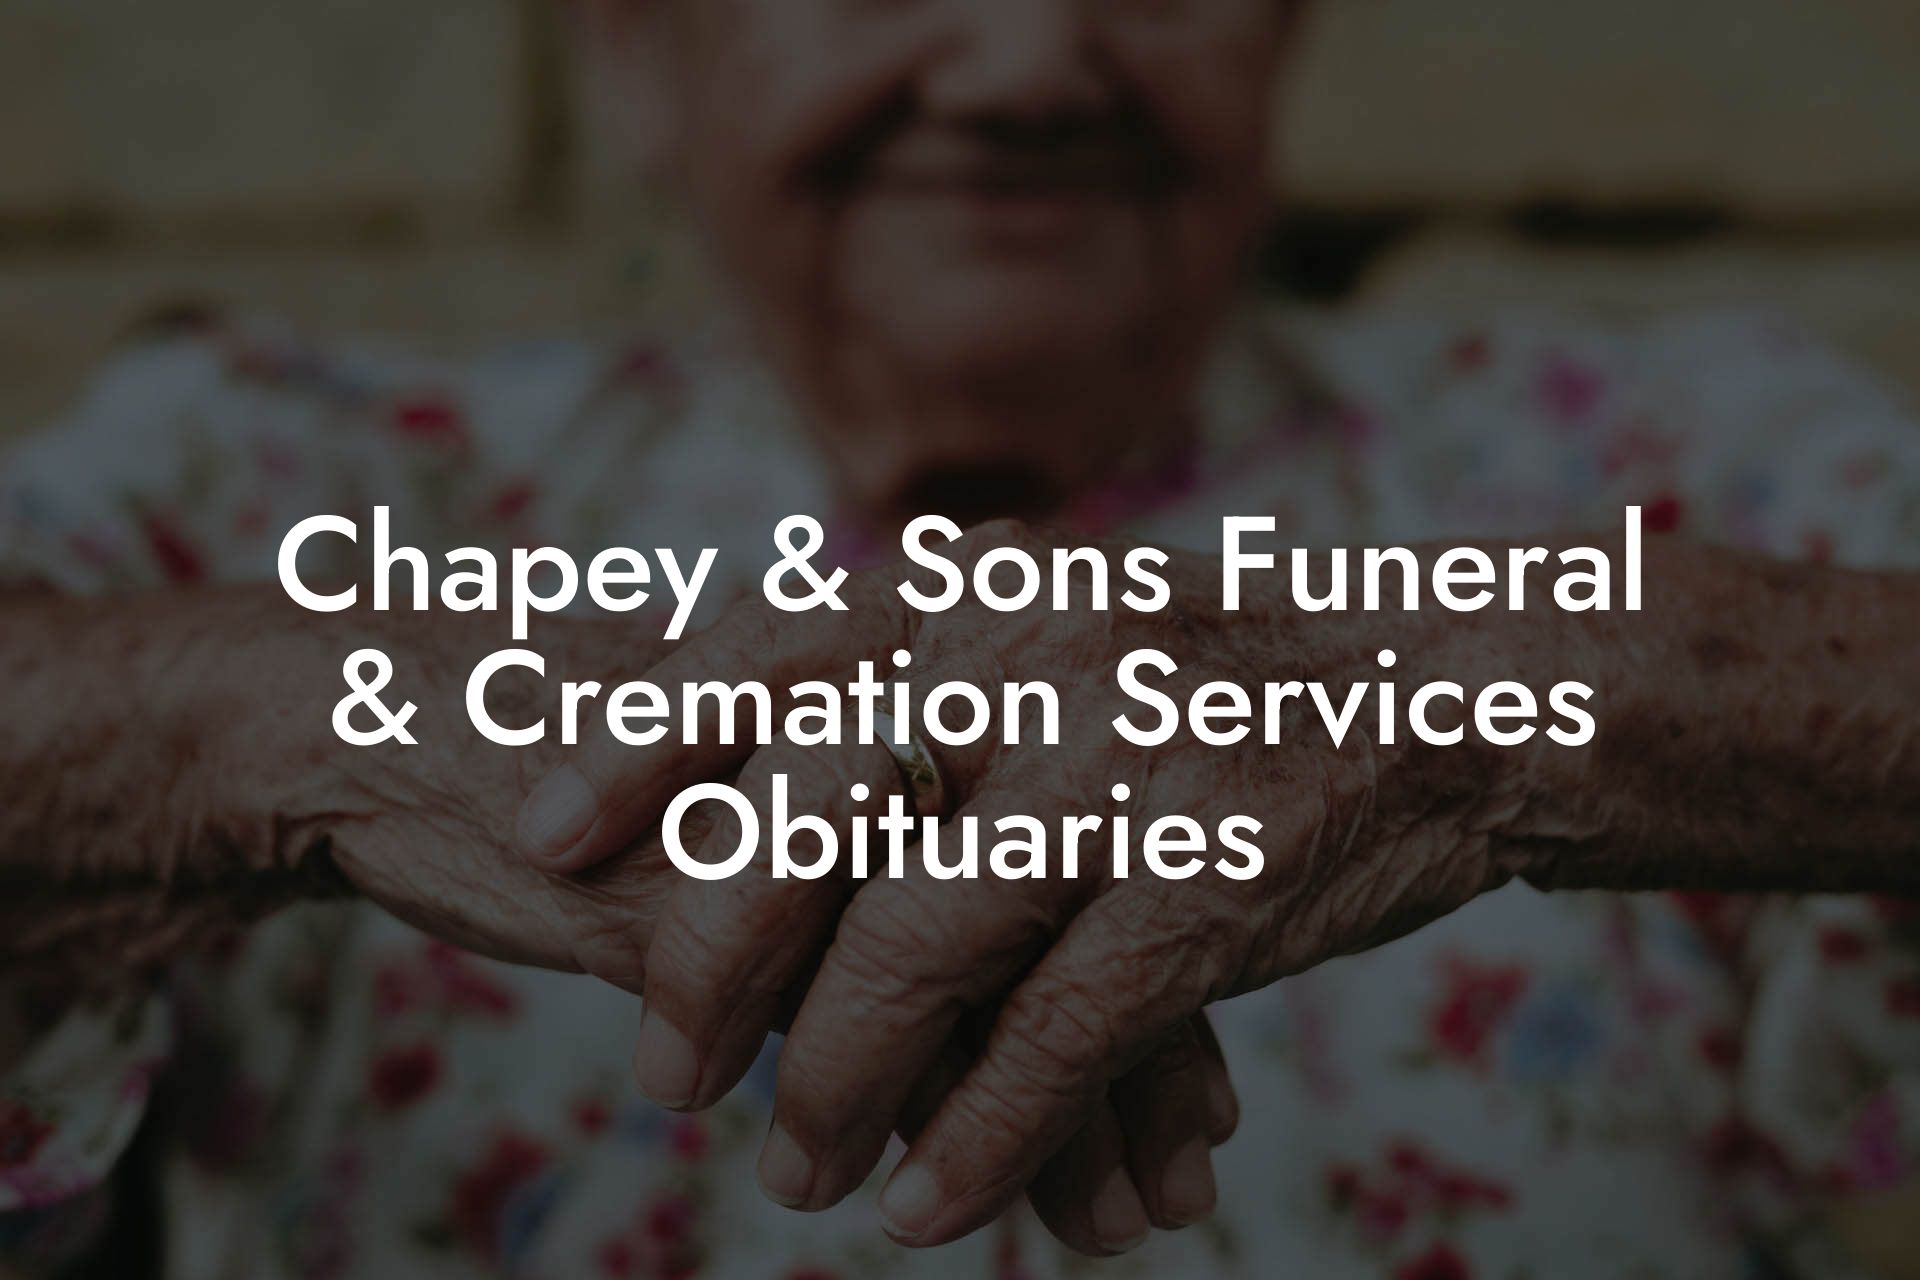 Chapey & Sons Funeral & Cremation Services Obituaries